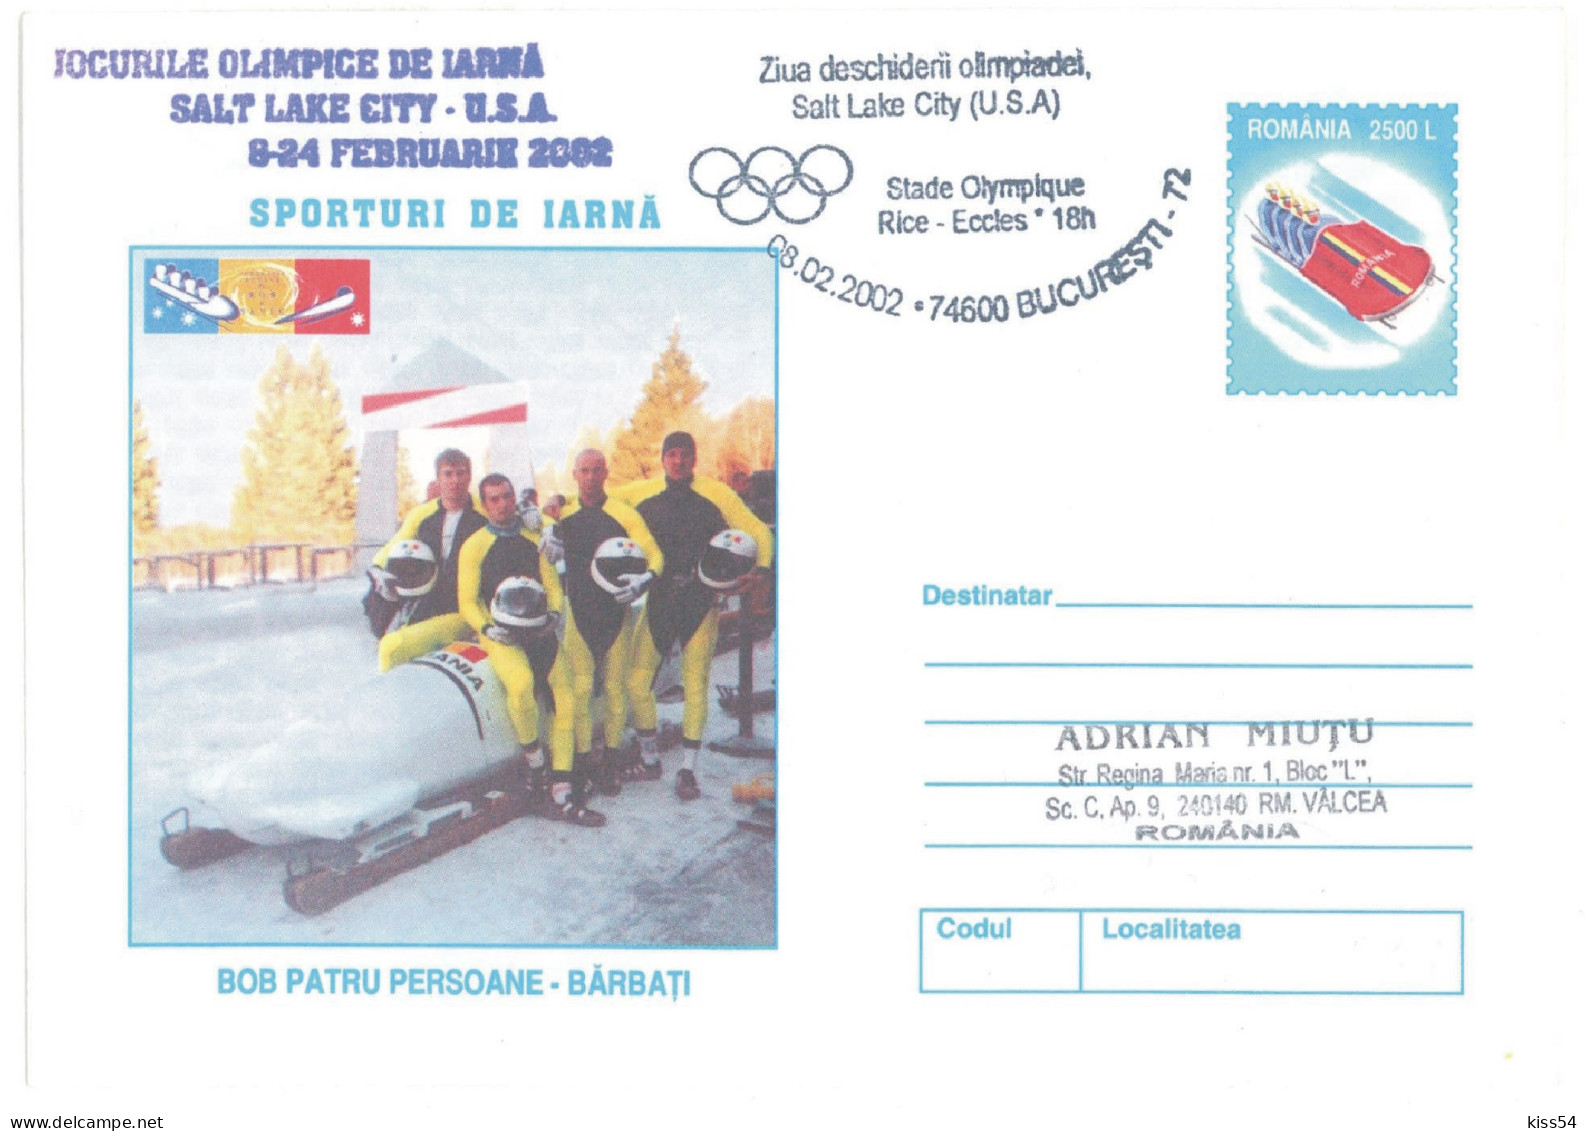 IP 2001 - 0226a U. S. A. SALT LAKE CITY 2002 - 4 BOBSLEIGHT MEN - Winter Olympic Games - Stationery - Used - 2001 - Invierno 2002: Salt Lake City